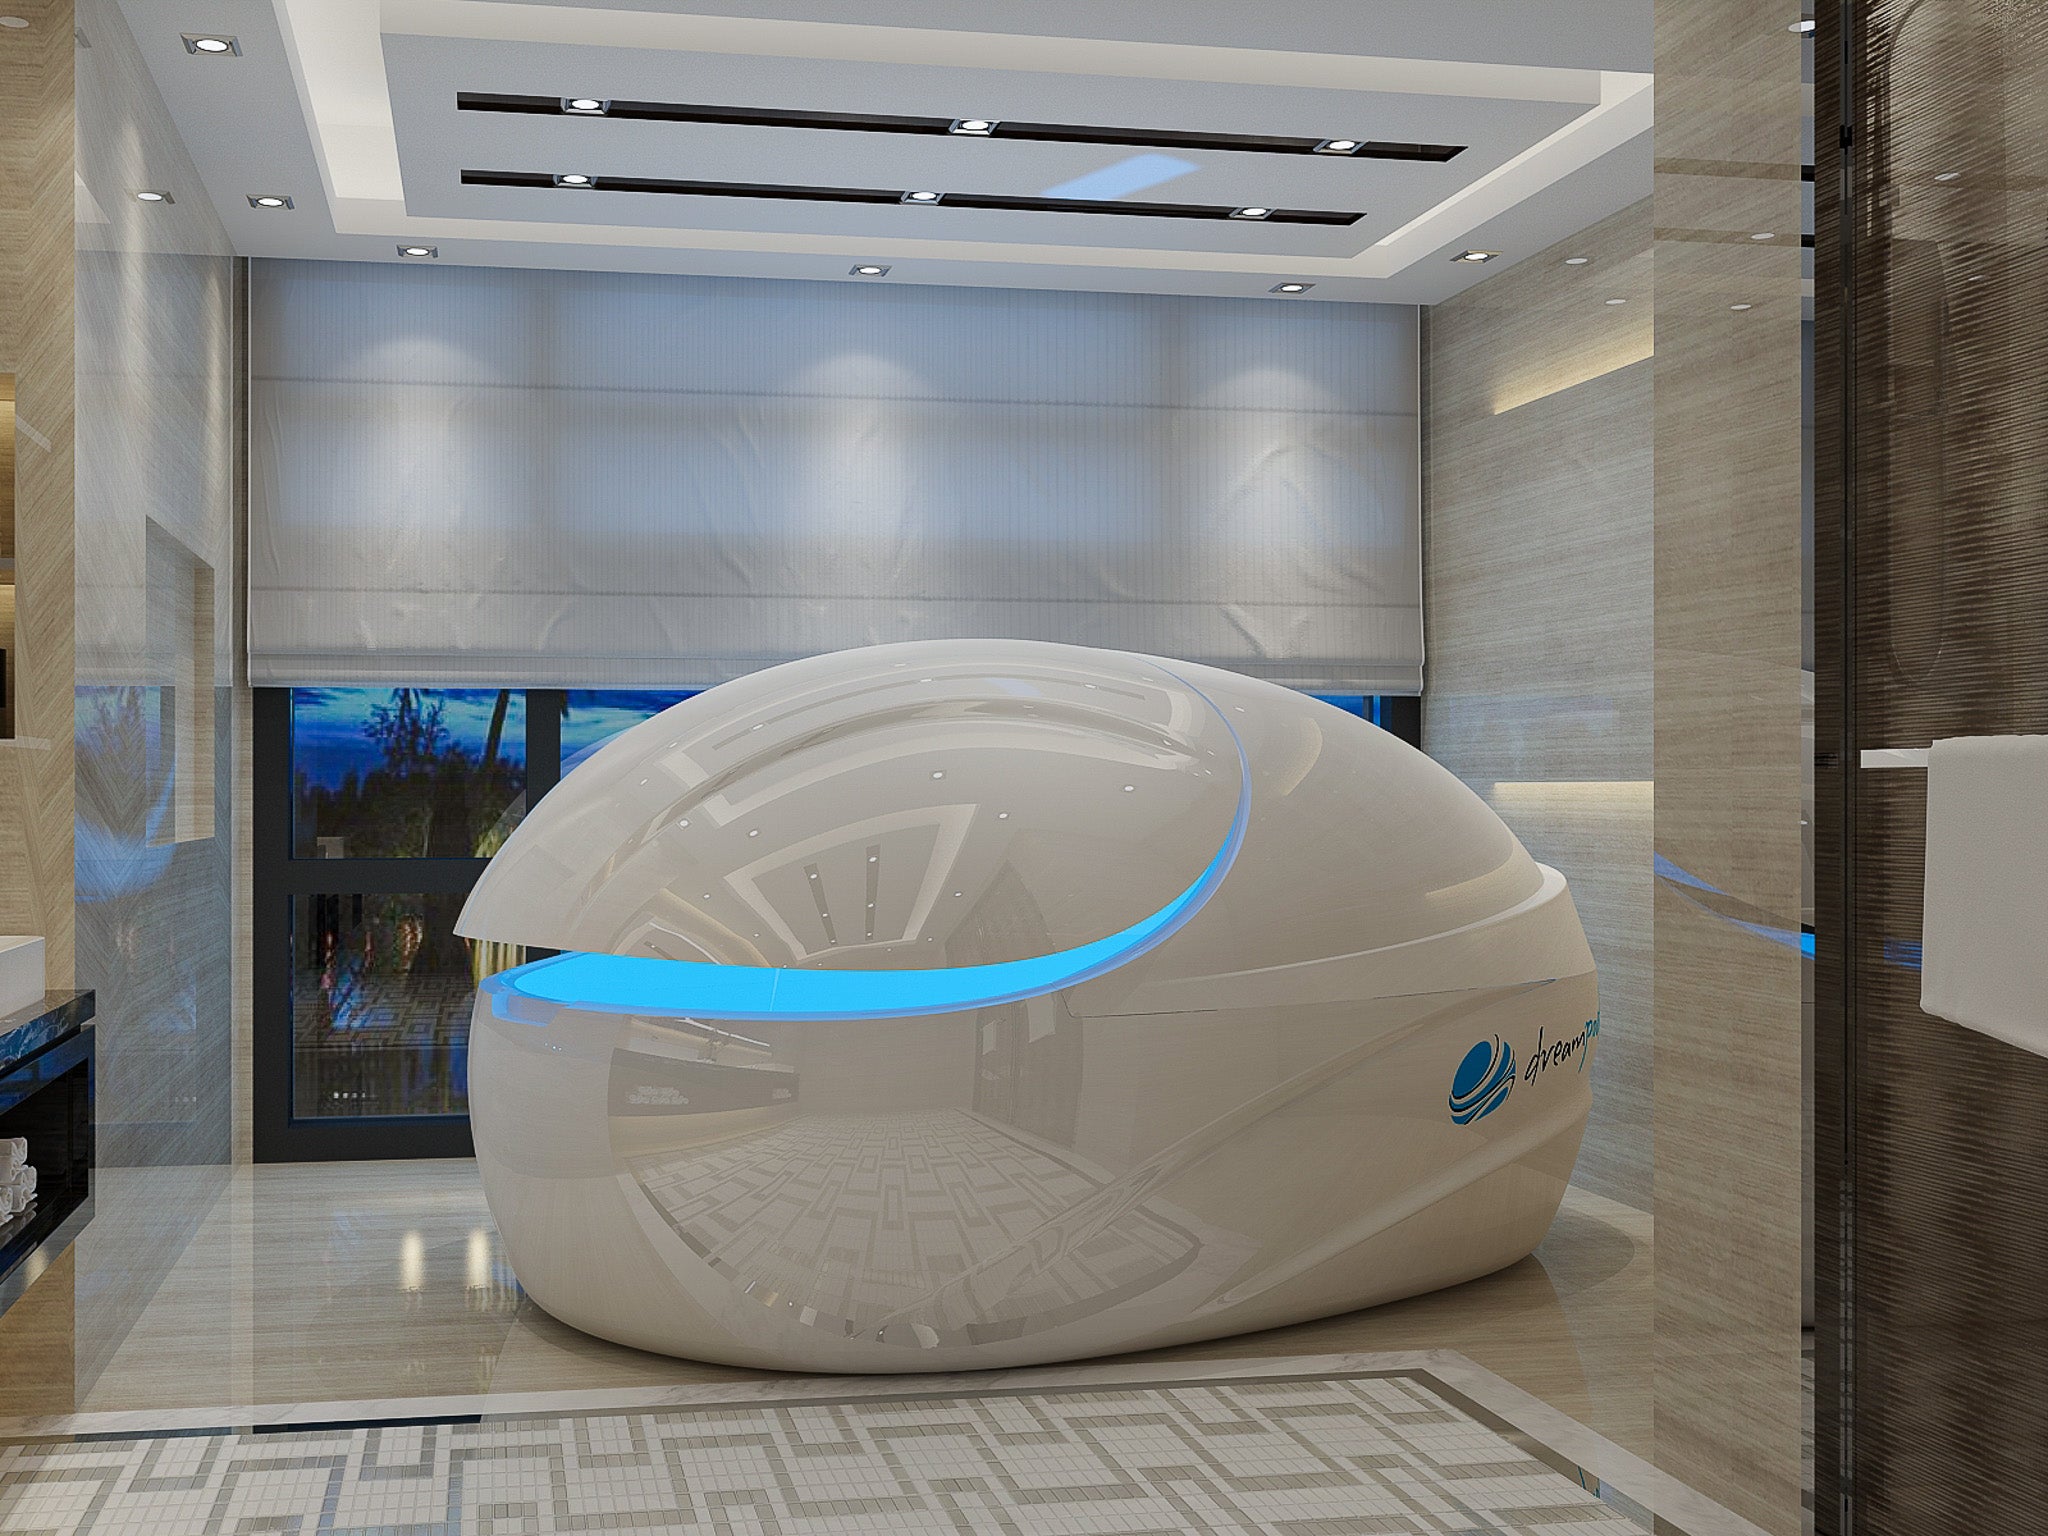 Dream-Pod Vmax WebPic Sensory Deprivation Chamber also known as a flotation tank used for providing restricted environmental stimulation therapy (REST) in an amazing modern, luxury home setting